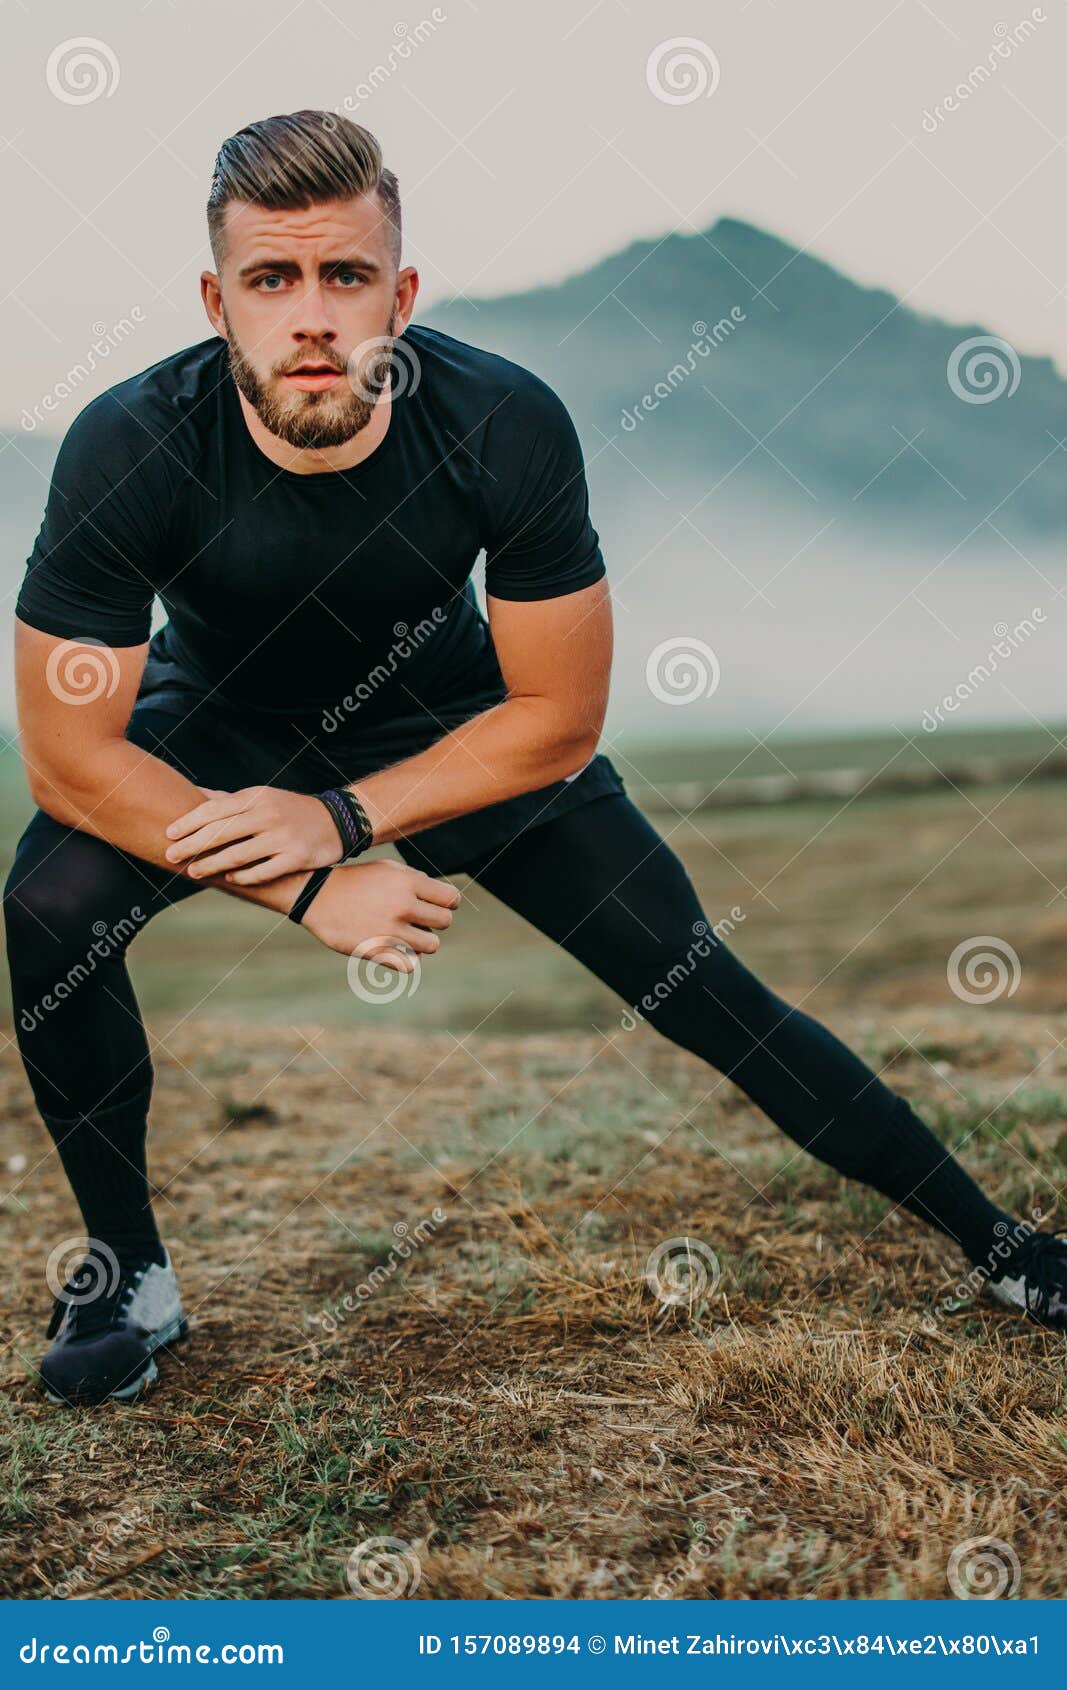 Man Doing Stretching and Preparing for Workout and Running Outdoors ...